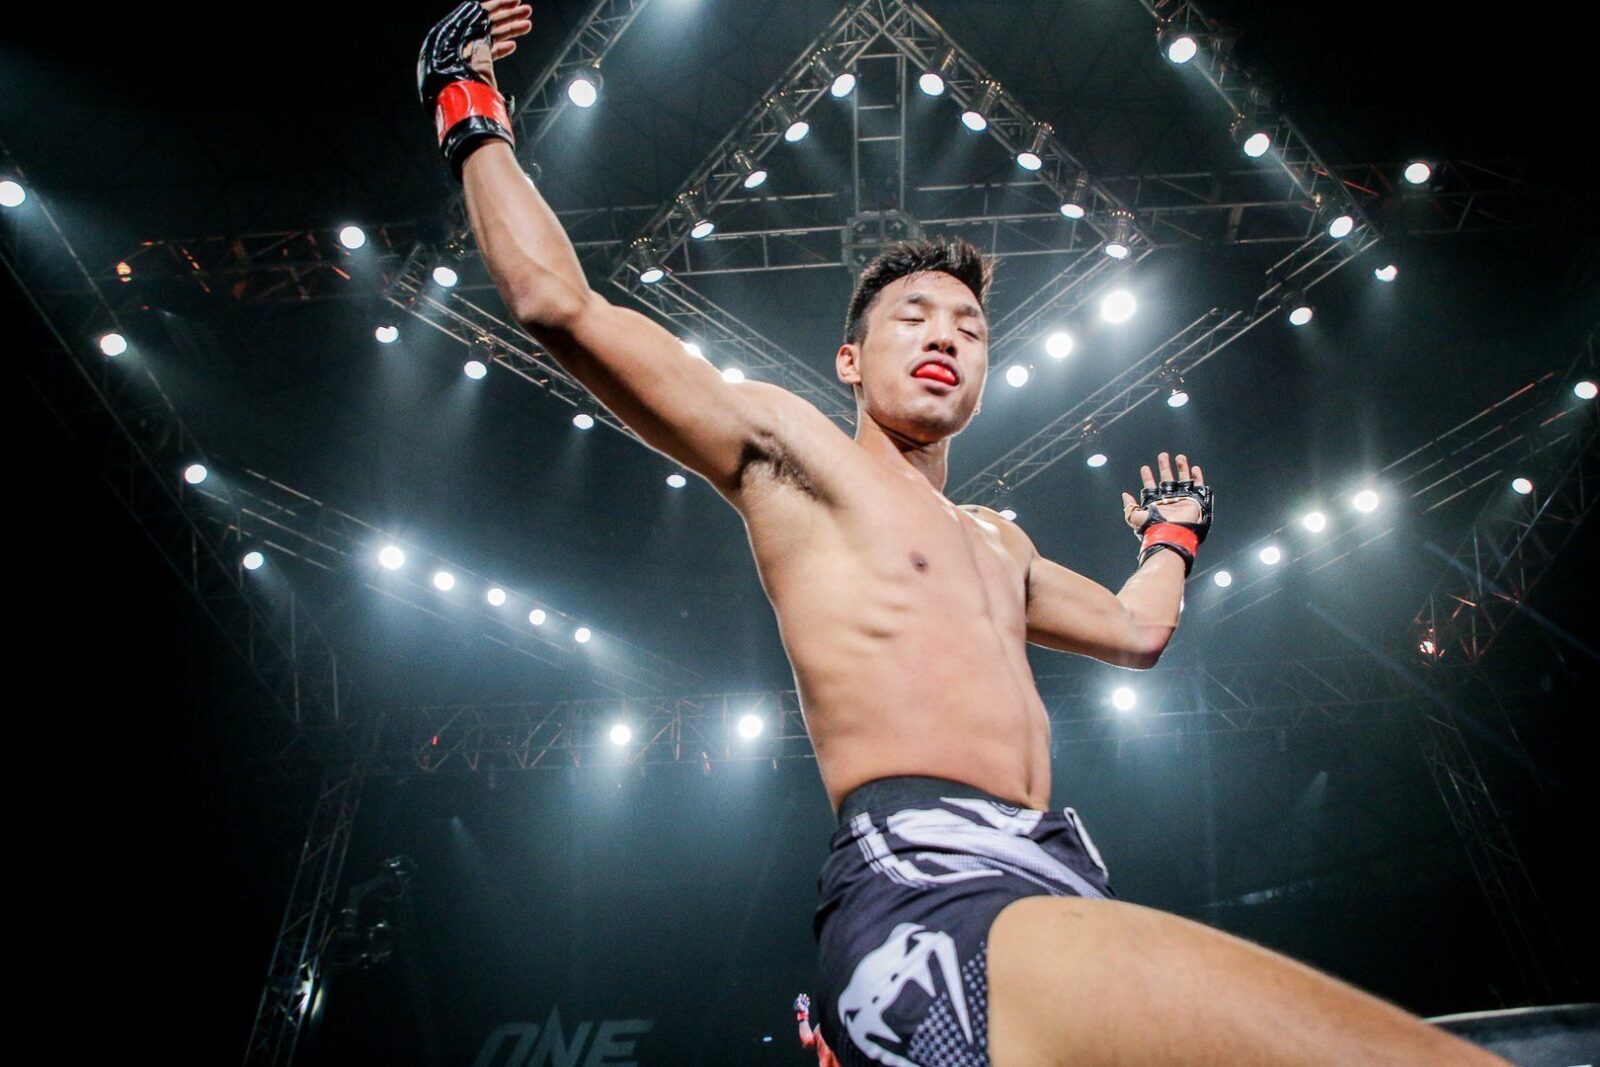 Keanu Subba during one of his boxing matches posing victoriously.